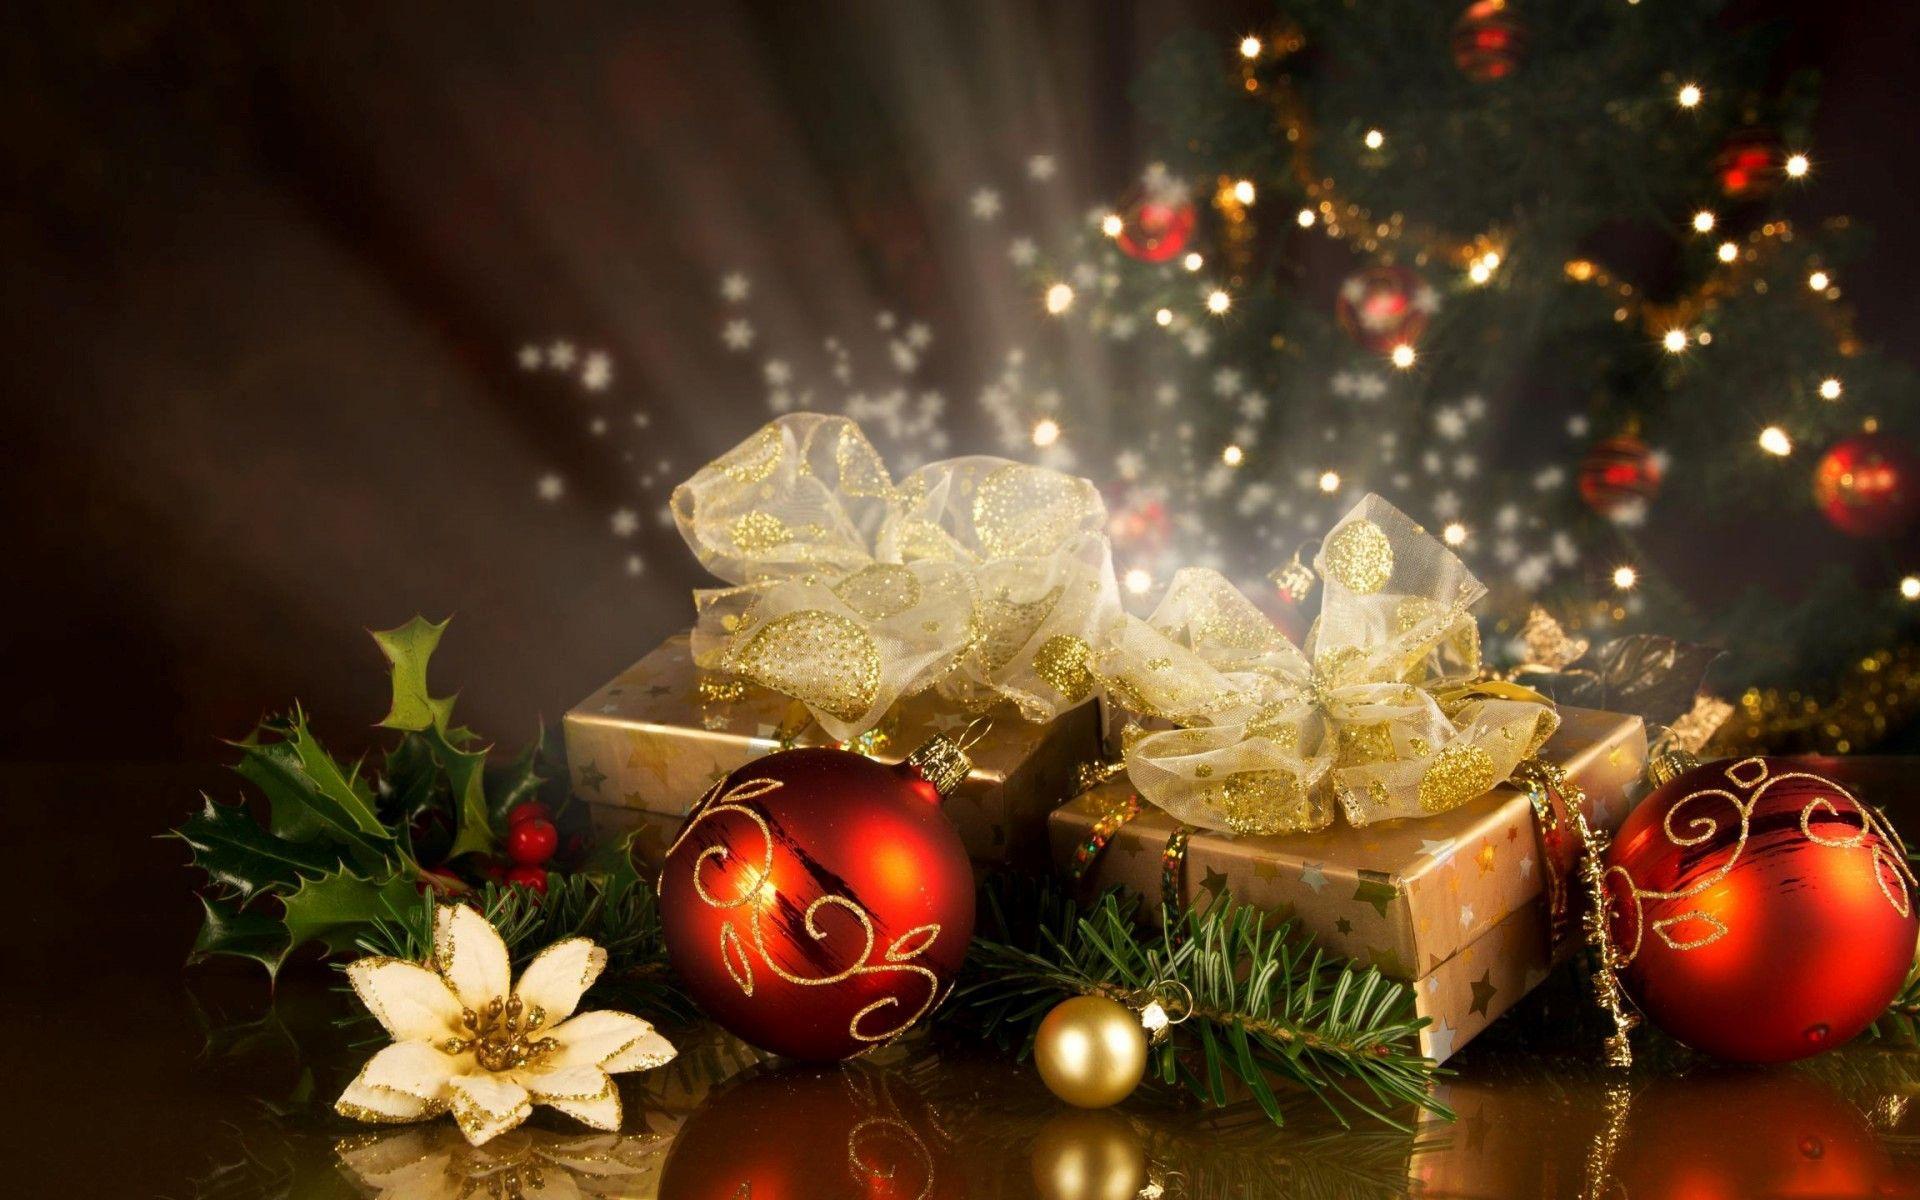 Christmas Gifts and Decoration Balls on 2013 Festival HD Wallpaper